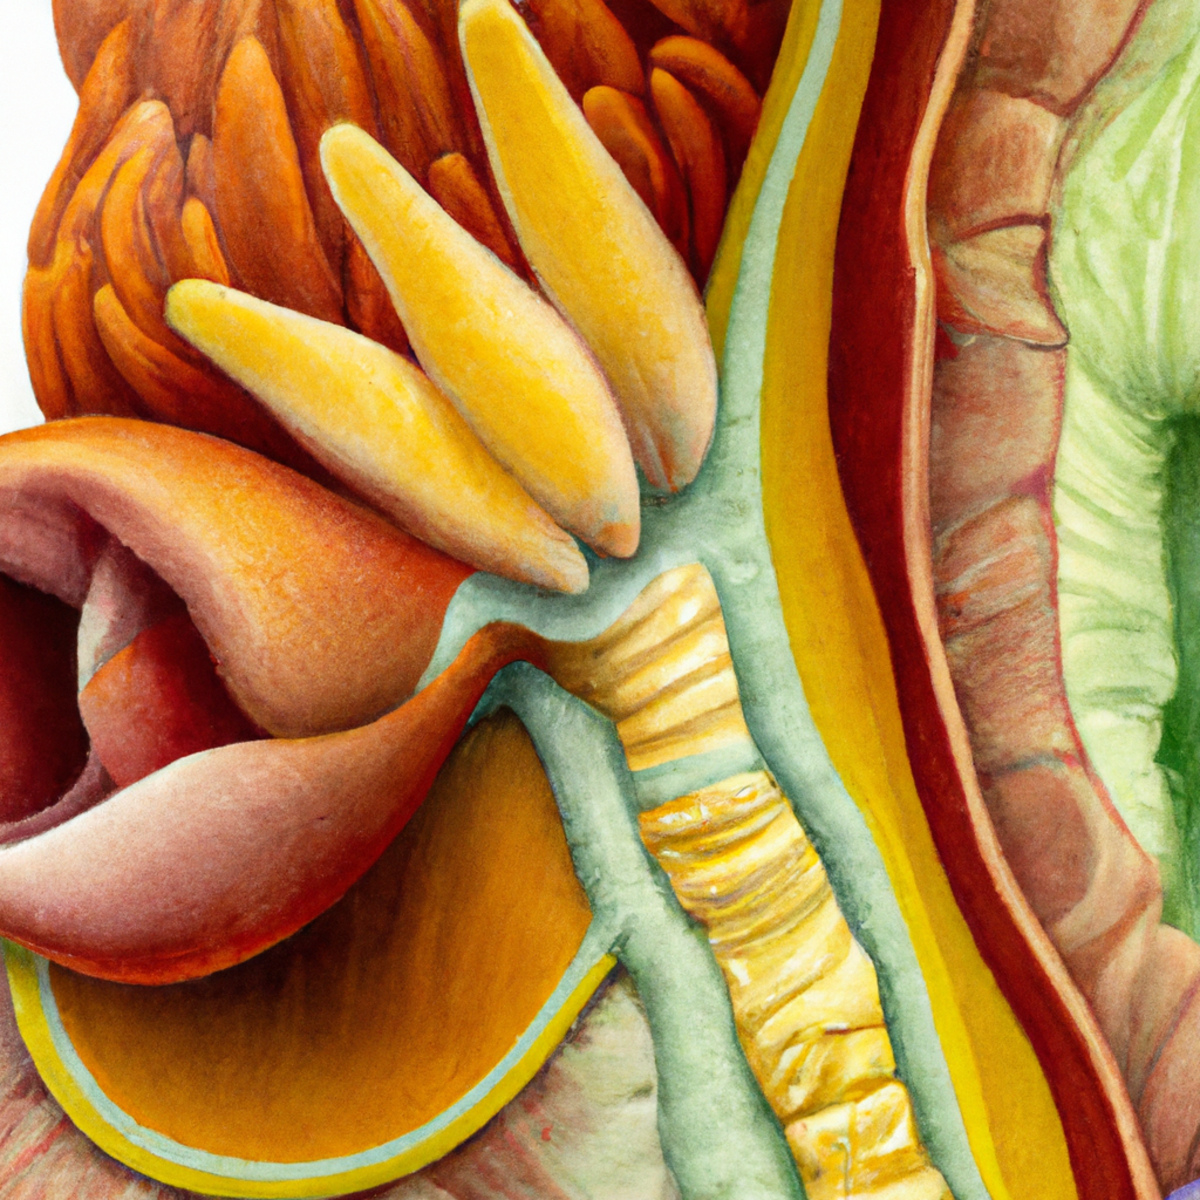 Close-up medical illustration of gallbladder, liver, and bile ducts, highlighting intricate anatomy and interconnectedness.